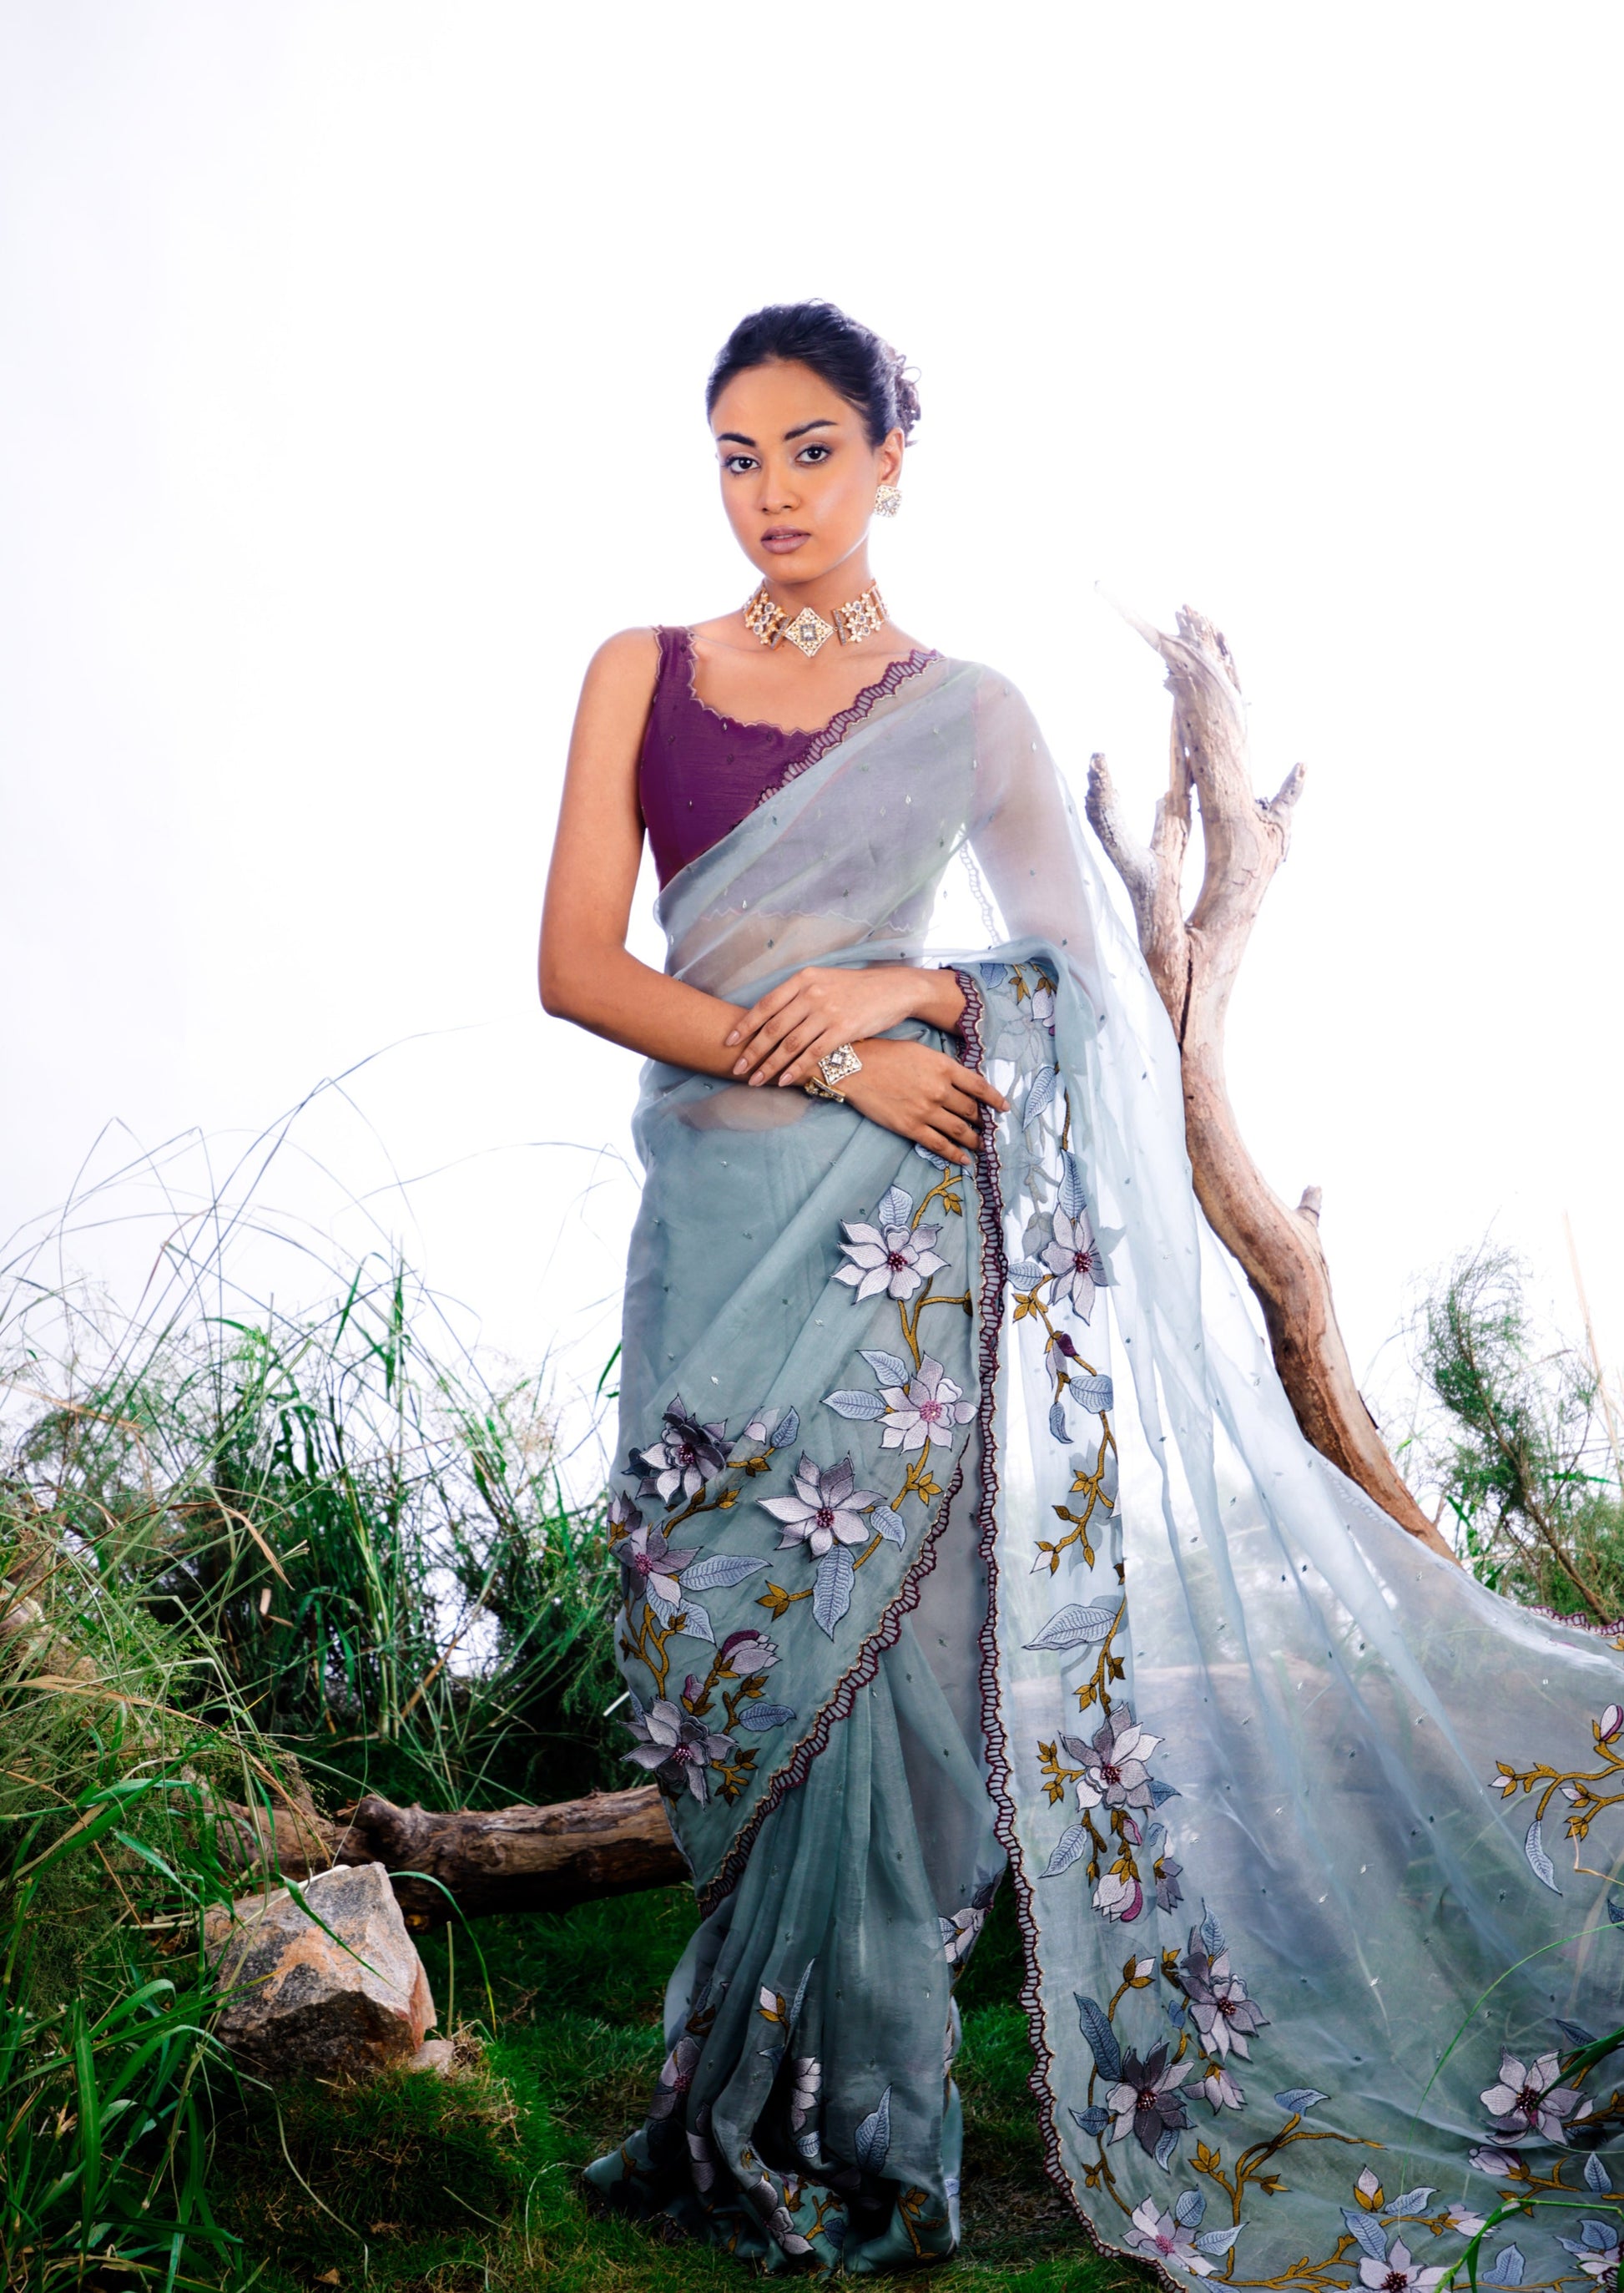 The saree features an enchanting display of 3D embroidered floral motifs that cascade like a blooming vine across the fabric.